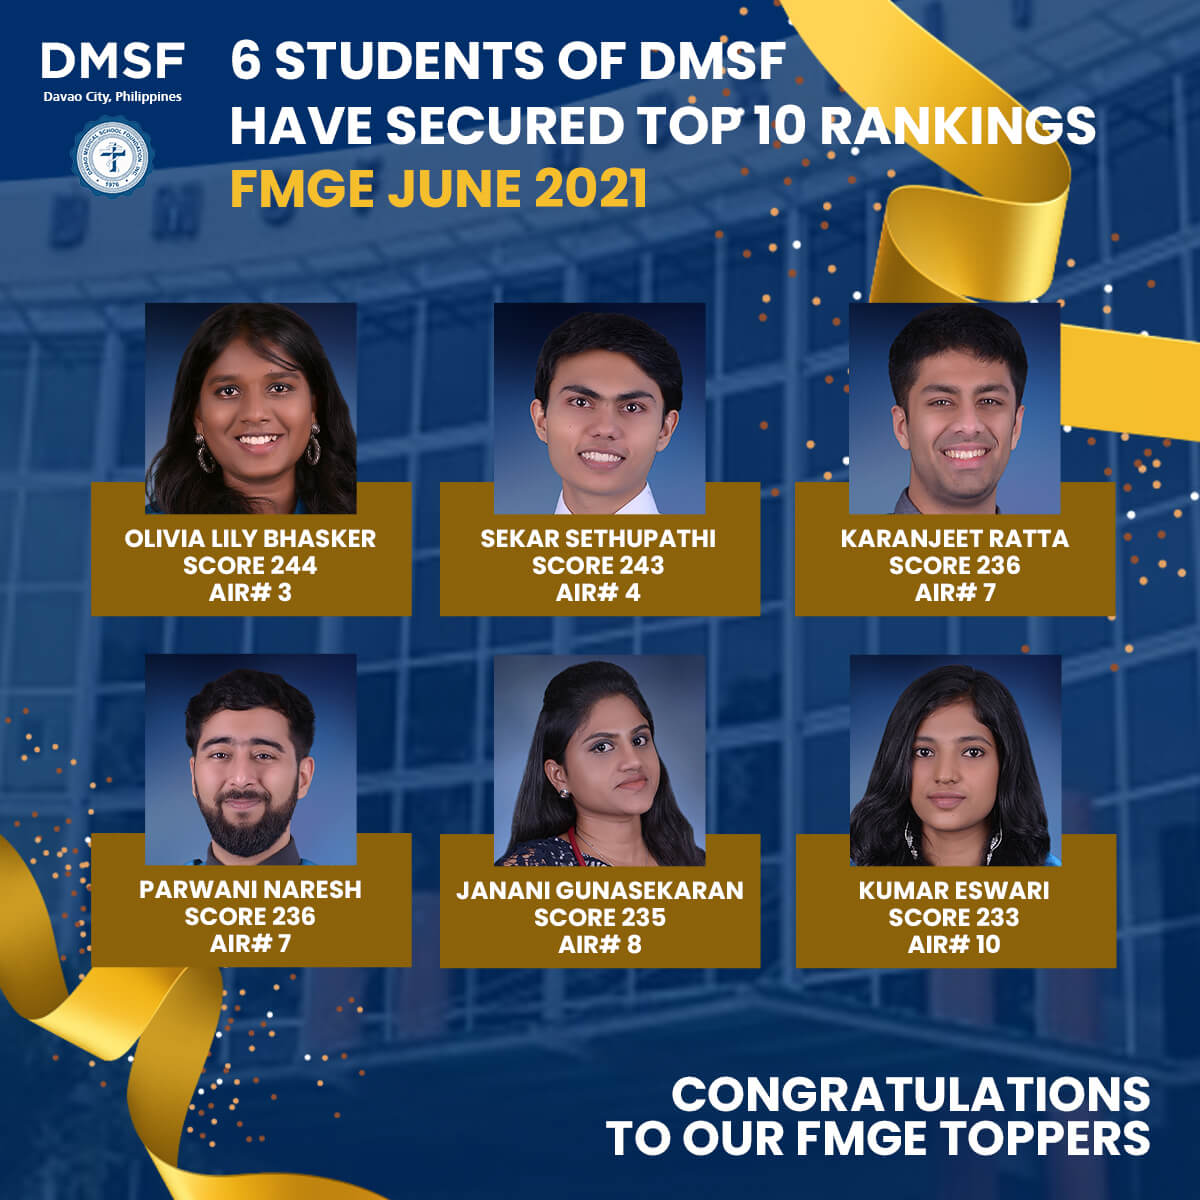 DMSF's six toppers at FMGE June 2021